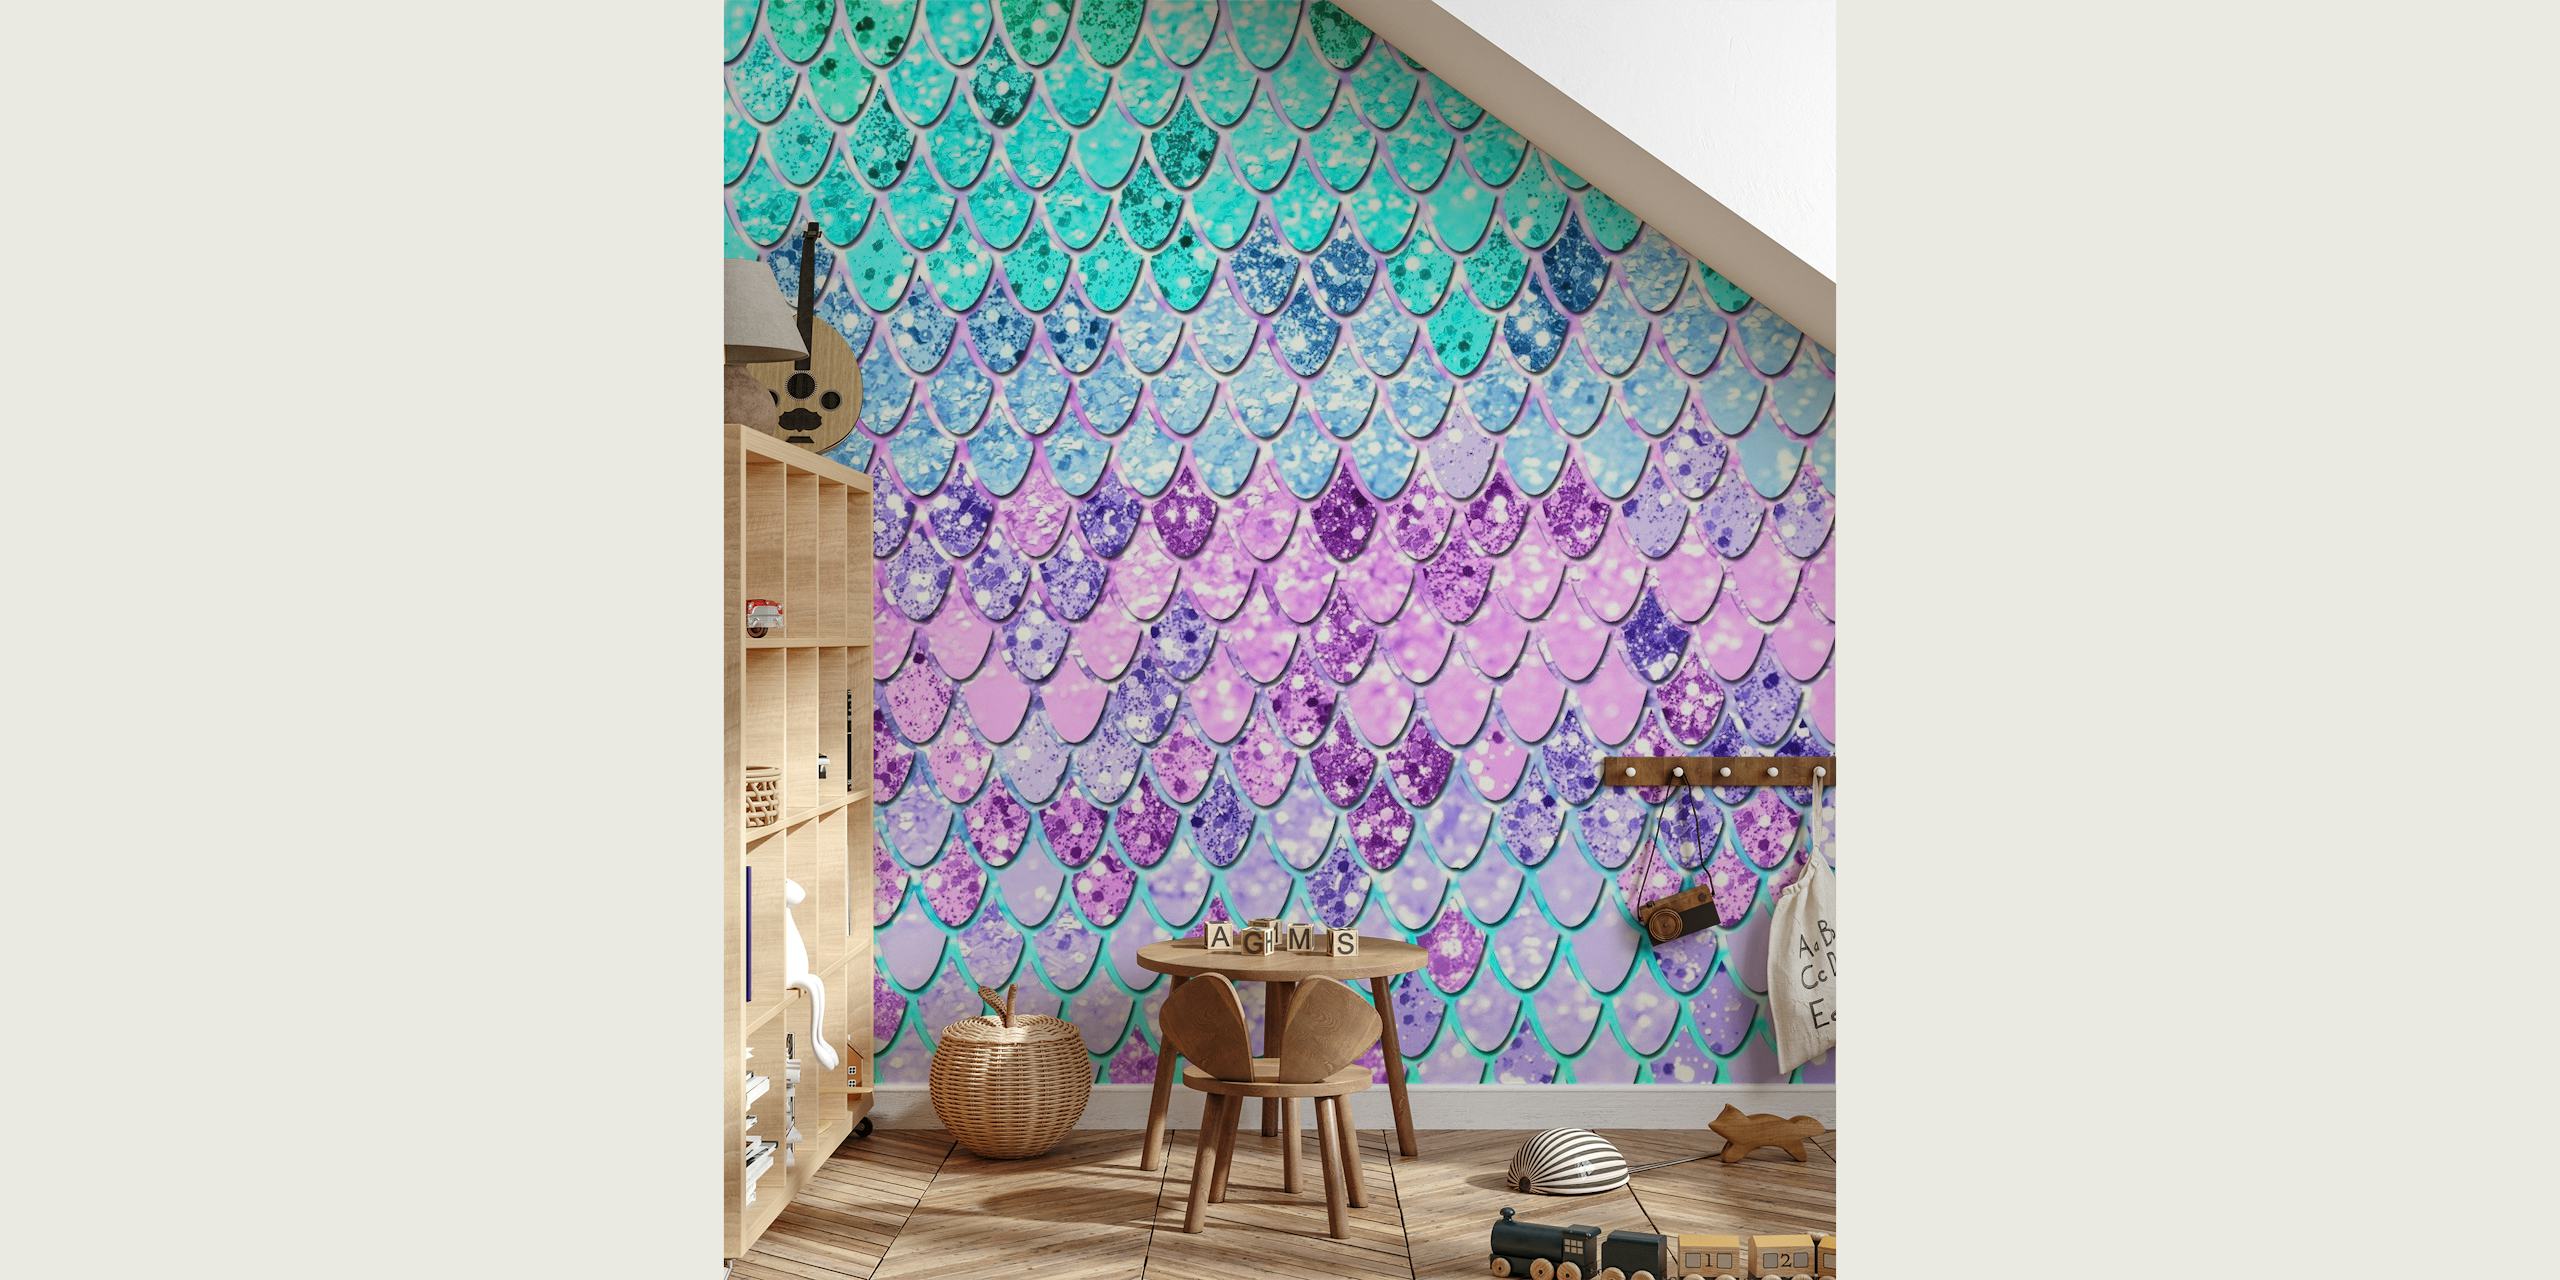 Iridescent mermaid scale pattern wall mural with aqua blues and purples and a glitter effect